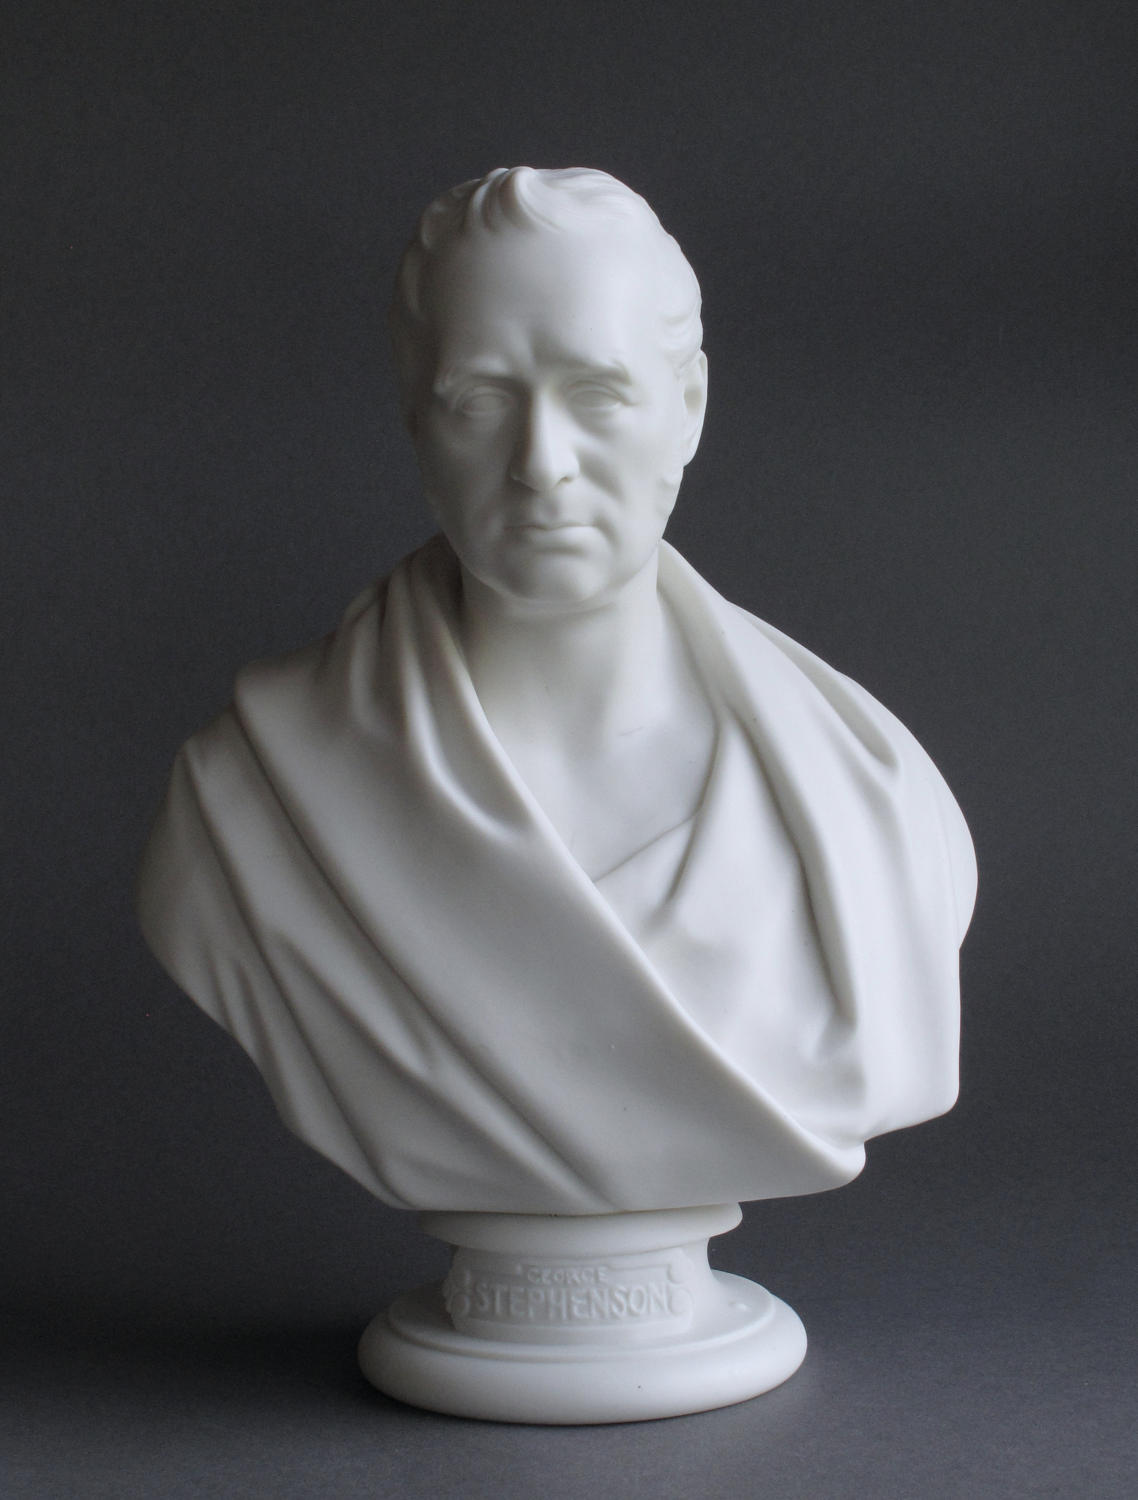 A Minton Parian bust of George Stephenson